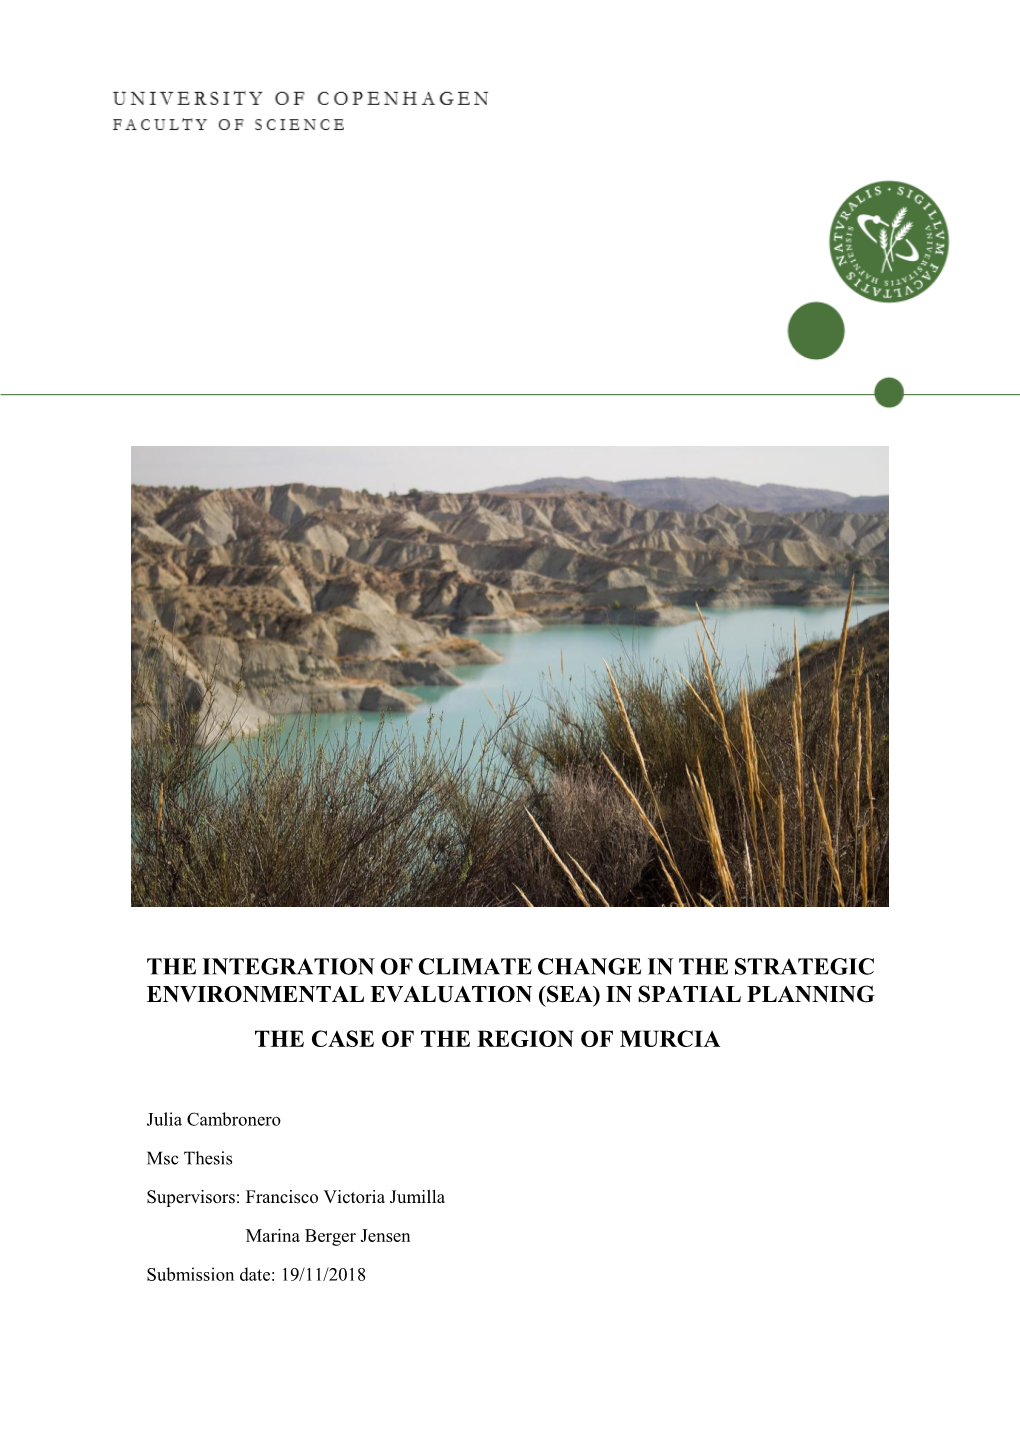 The Integration of Climate Change in the Strategic Environmental Evaluation (Sea) in Spatial Planning the Case of the Region of Murcia